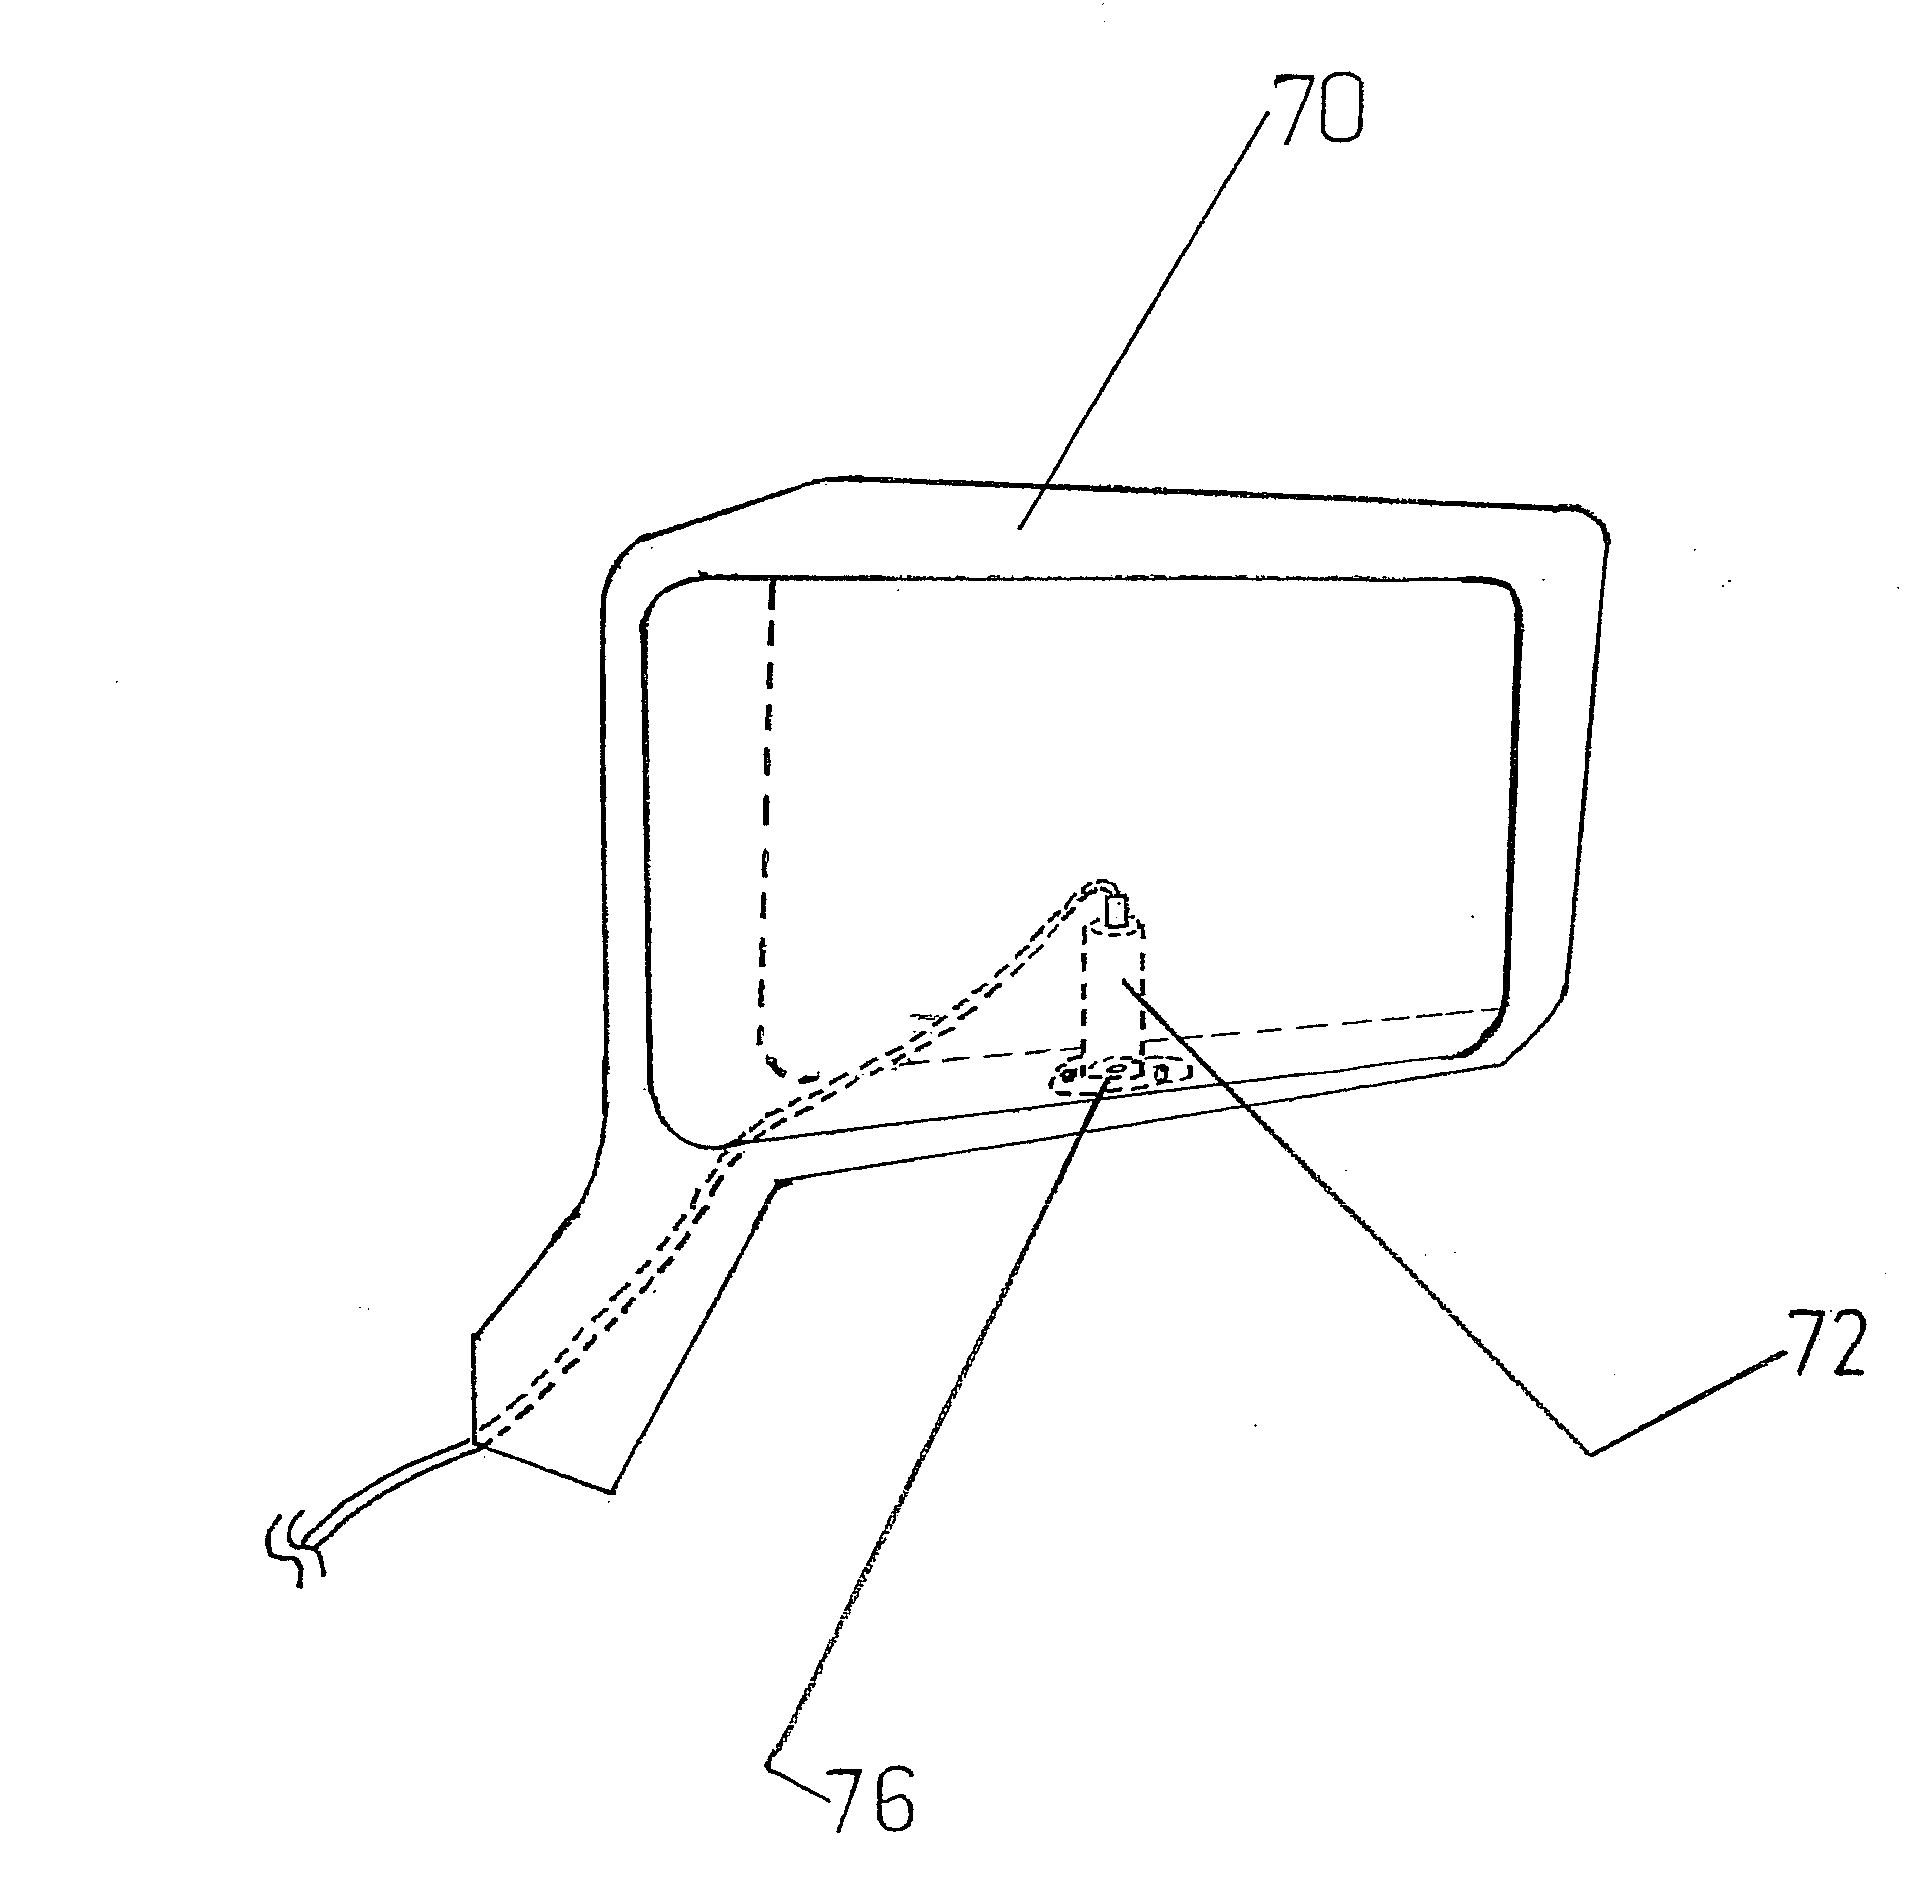 Method and system for laser projection and holographic diffraction grating for a vehicle